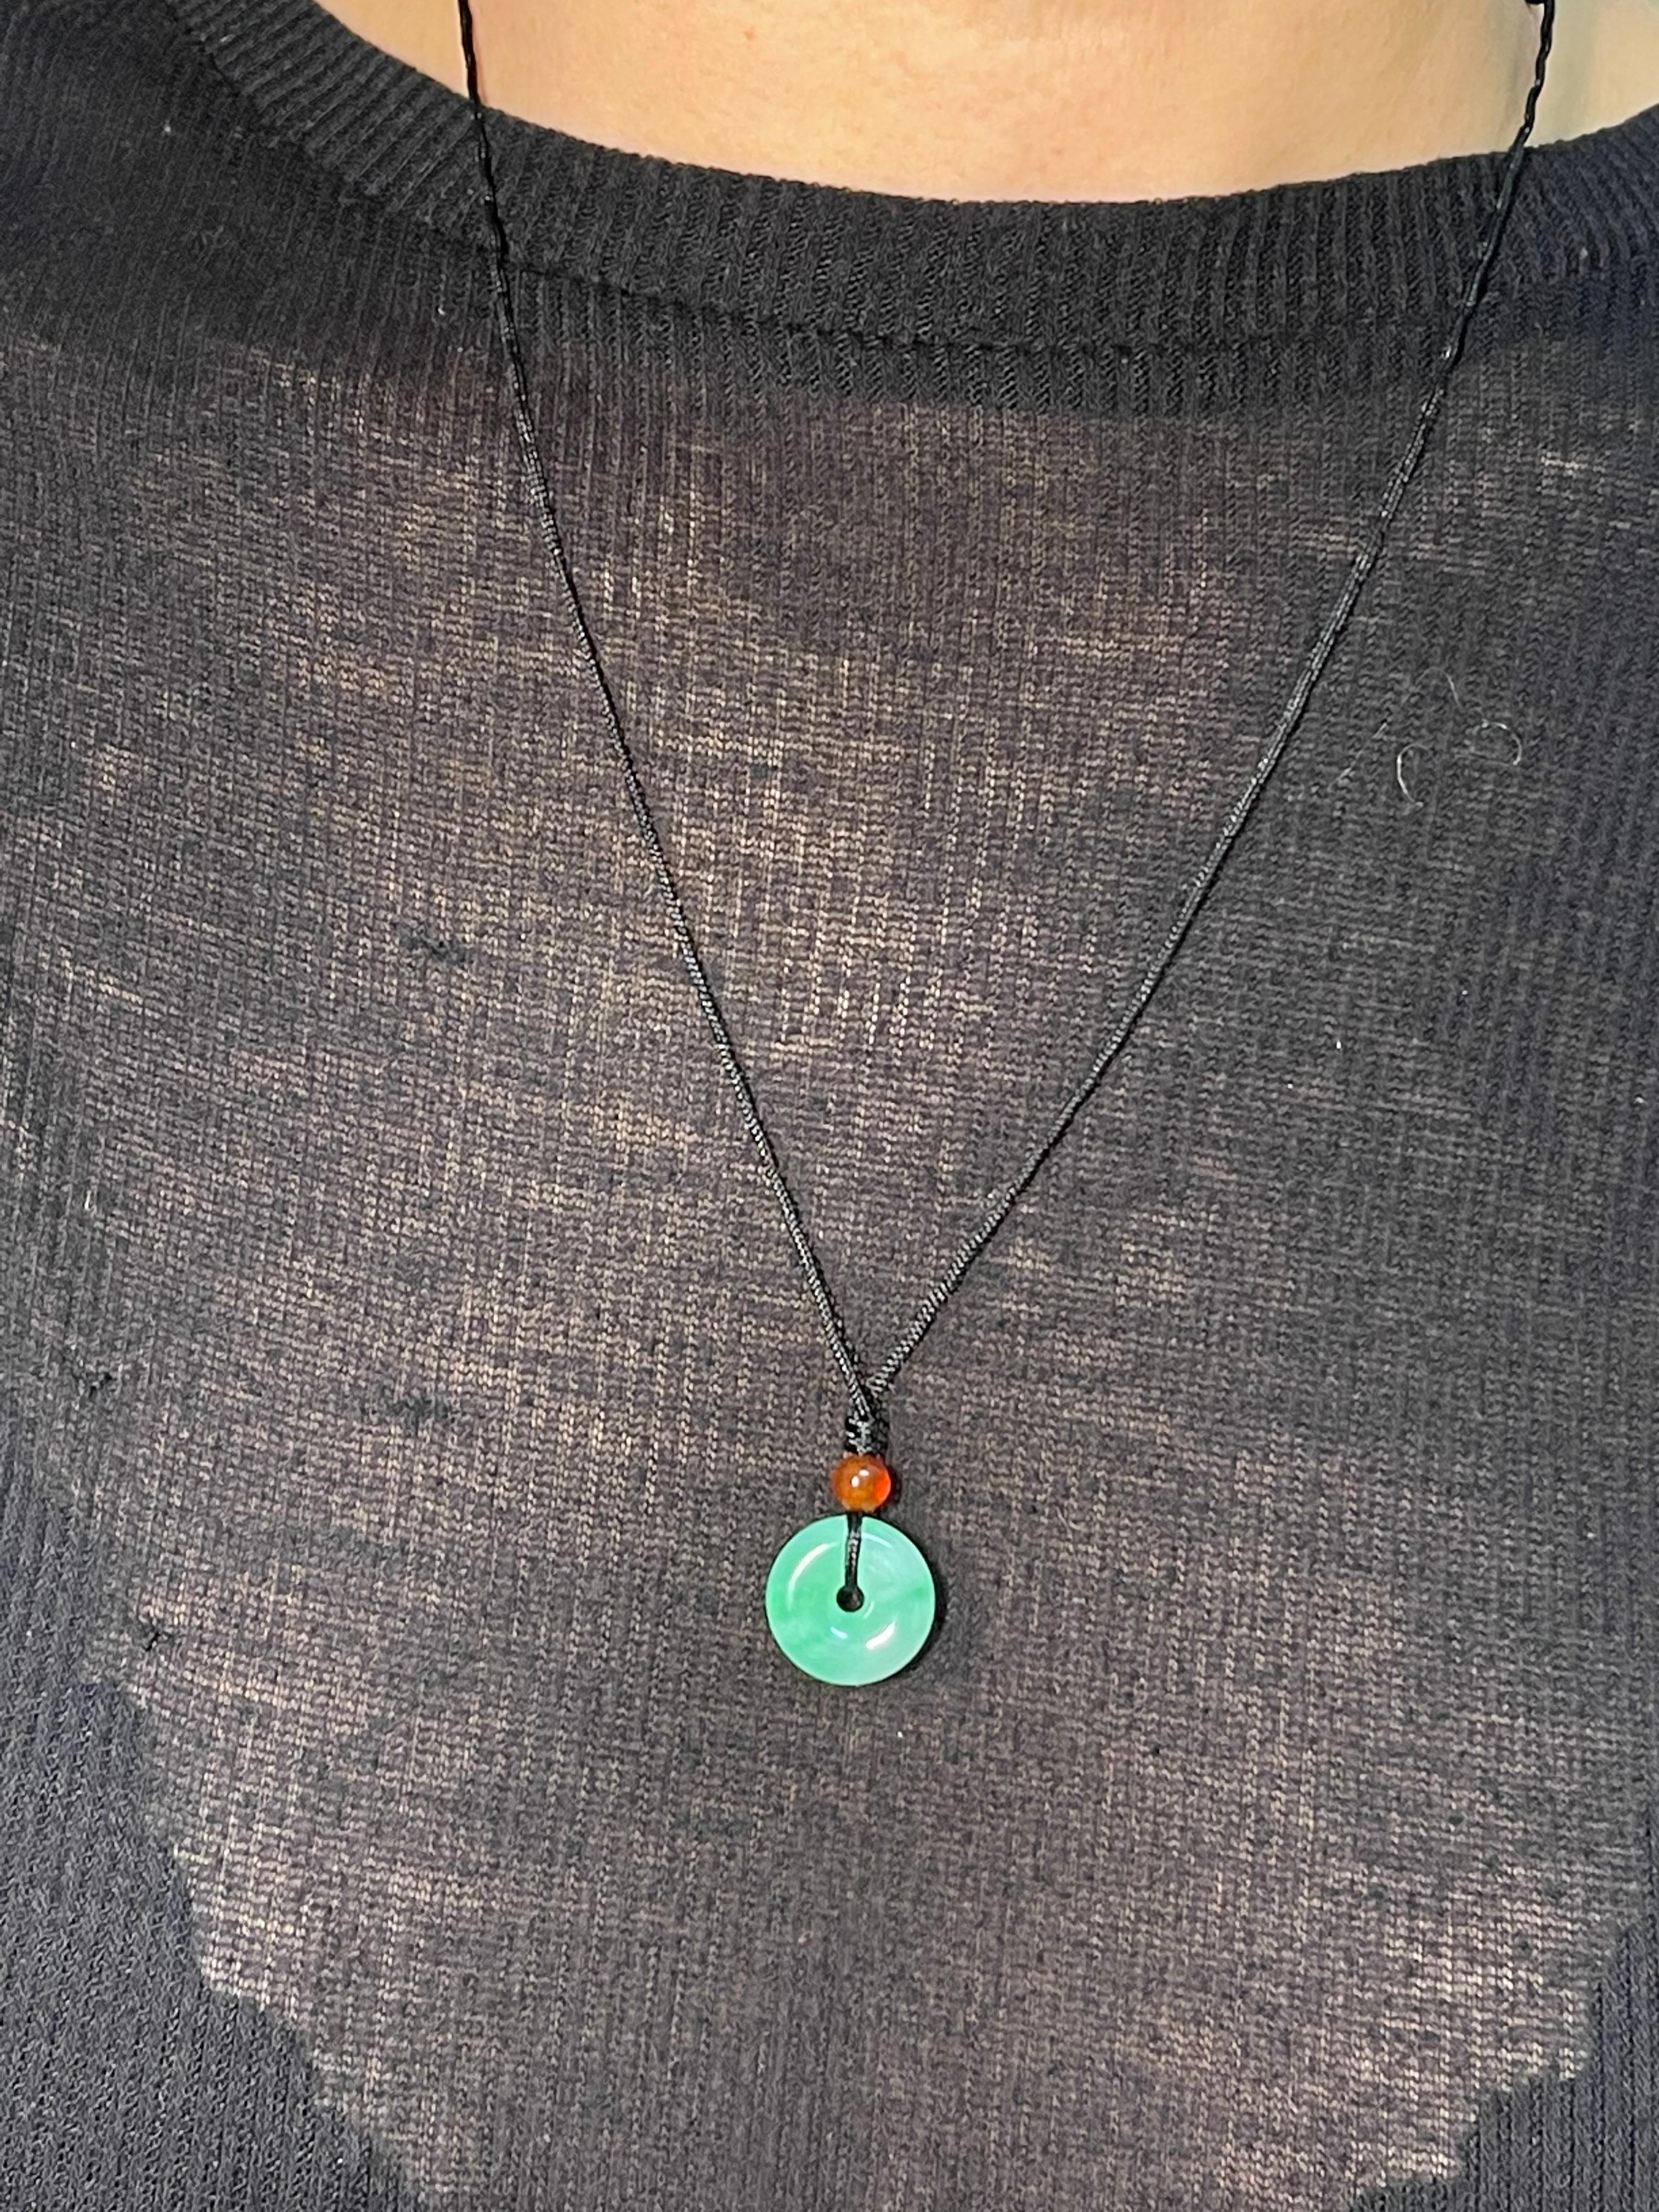 Please check out the HD video. This is certified natural jadeite jade. The jade donut (also know as a PEACE pendant) is paired with a nice red agate bead. The apple green jade and red agate are held together with a traditional Chinese string cord